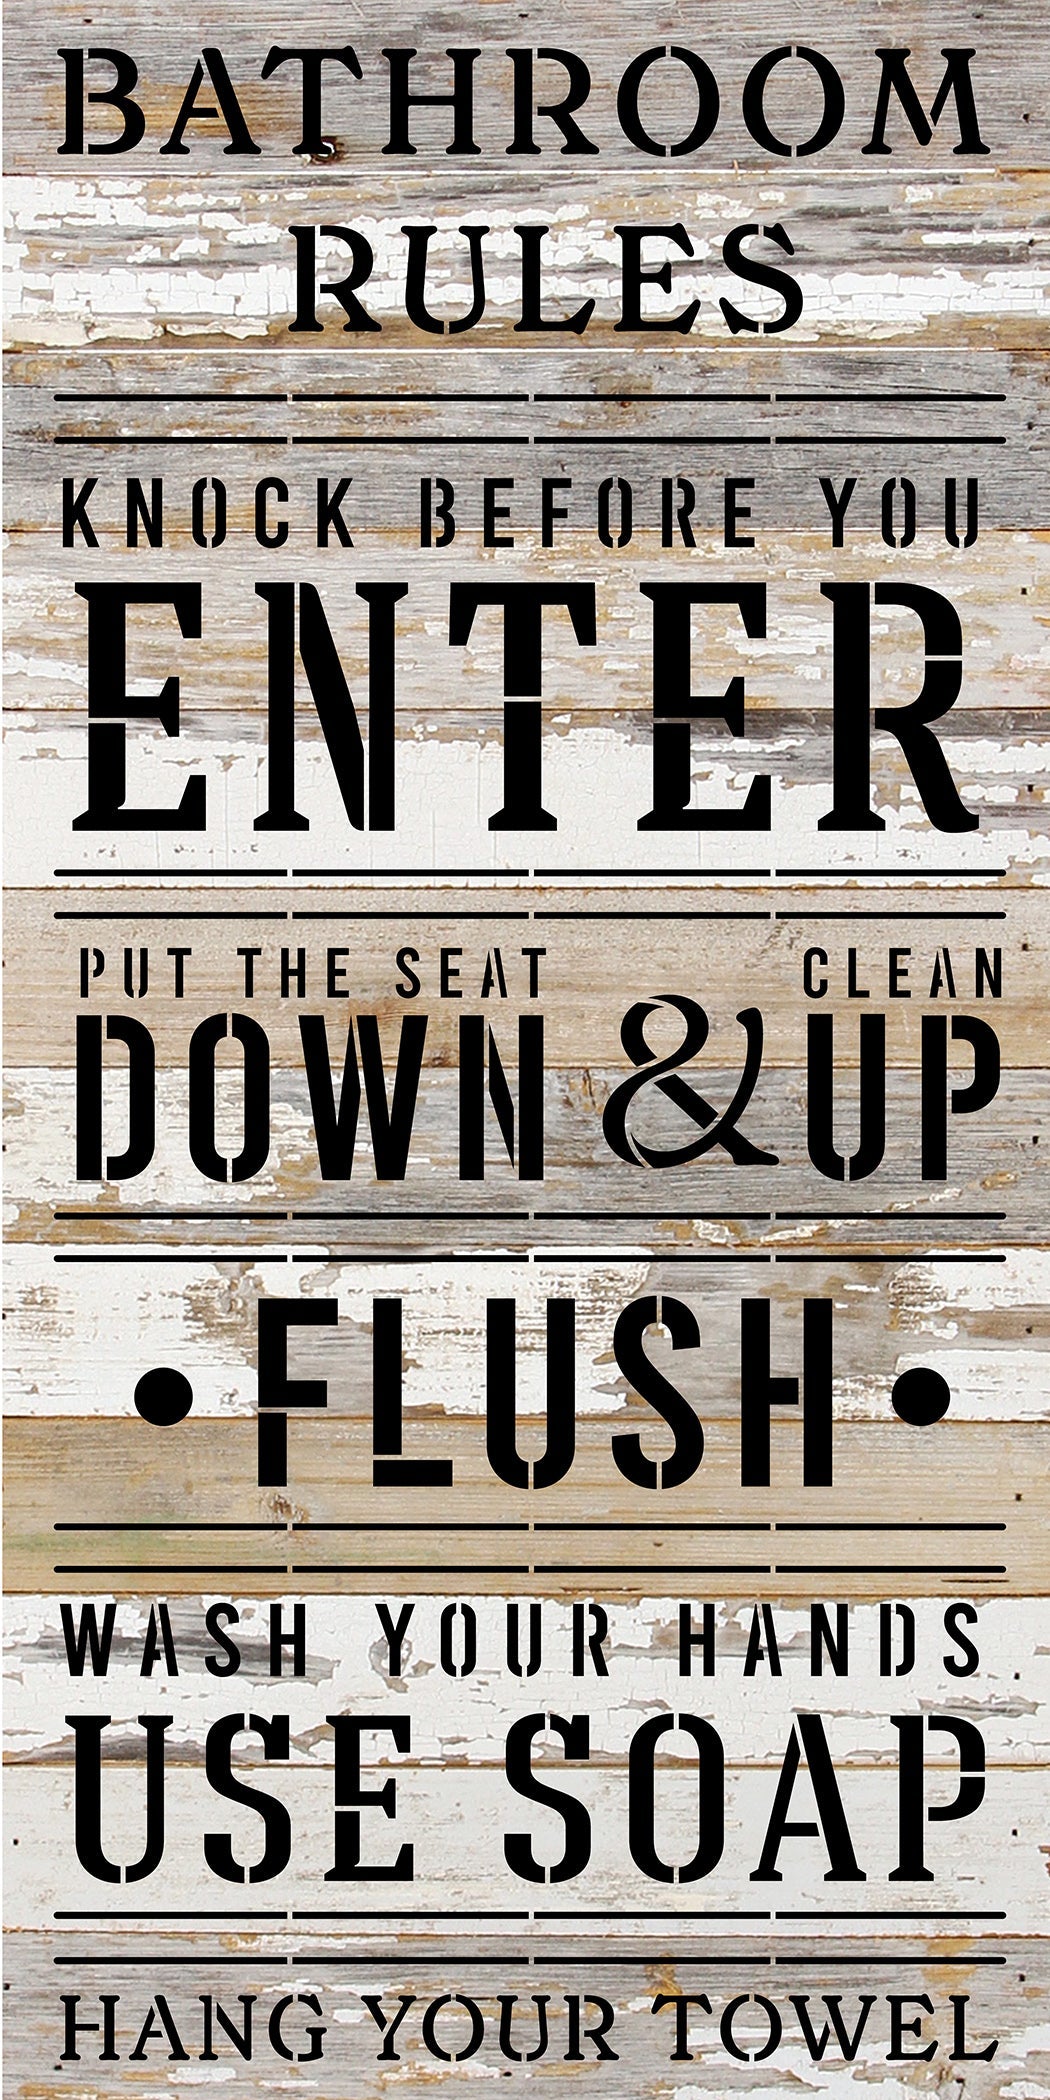 Bathroom Rules: Knock before you enter, flush, put the seat down... / 12x24 Reclaimed Wood Sign